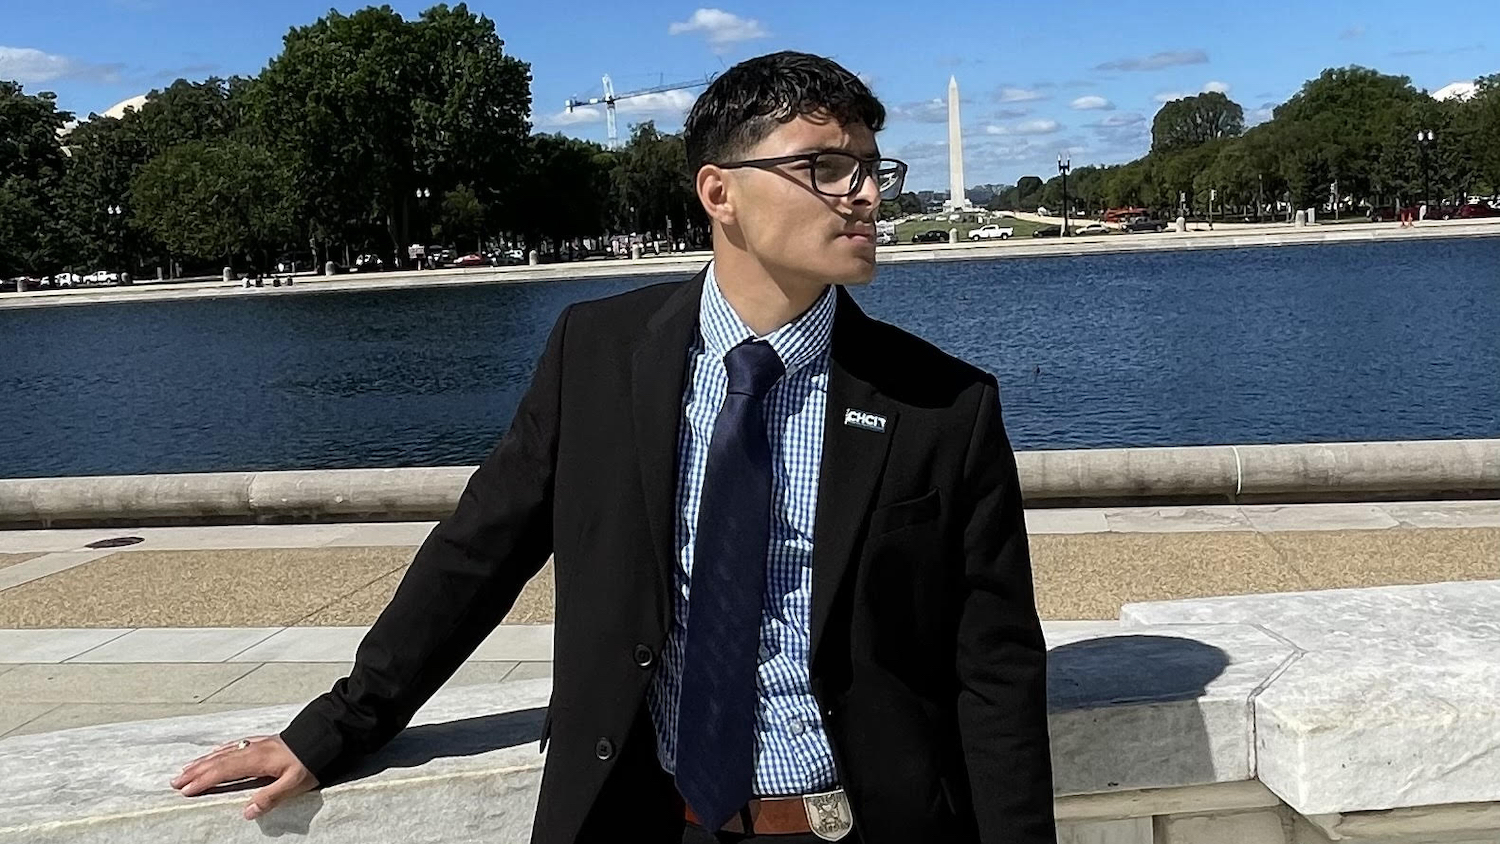 Jason Turcios, Public Policy Fellow for the Congressional Hispanic Caucus Institute (CHCI) in Washington D.C., stands with the Washington Monument in the background.